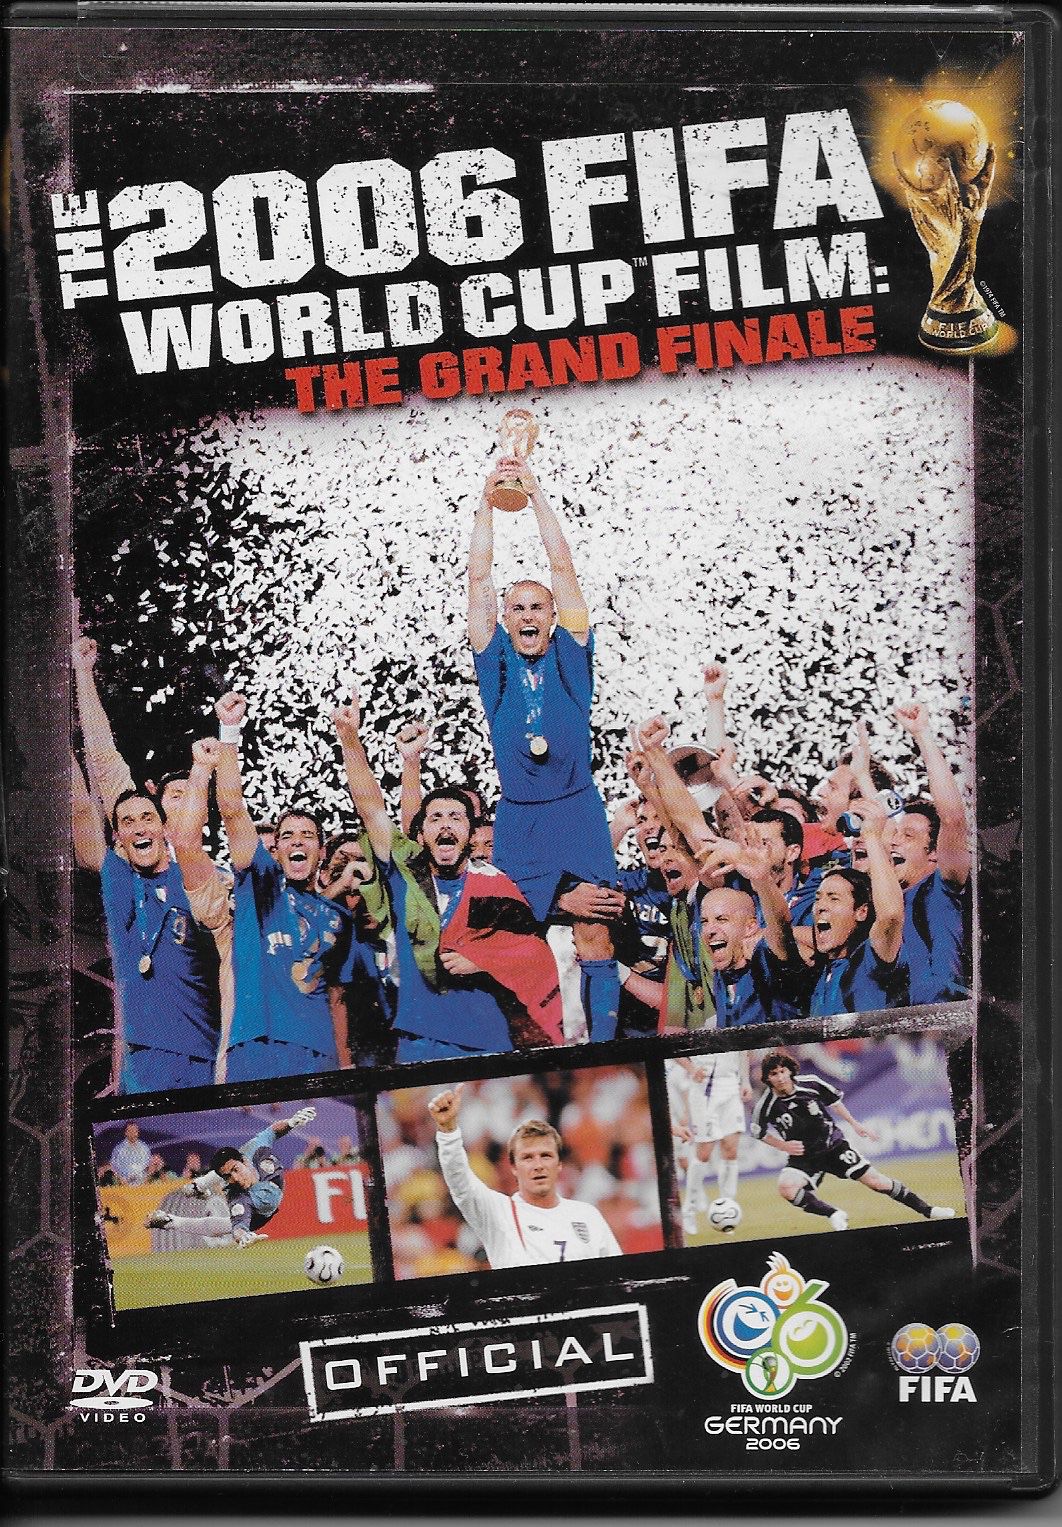 The 2006 FIFA World Cup Film: The Grand Finale